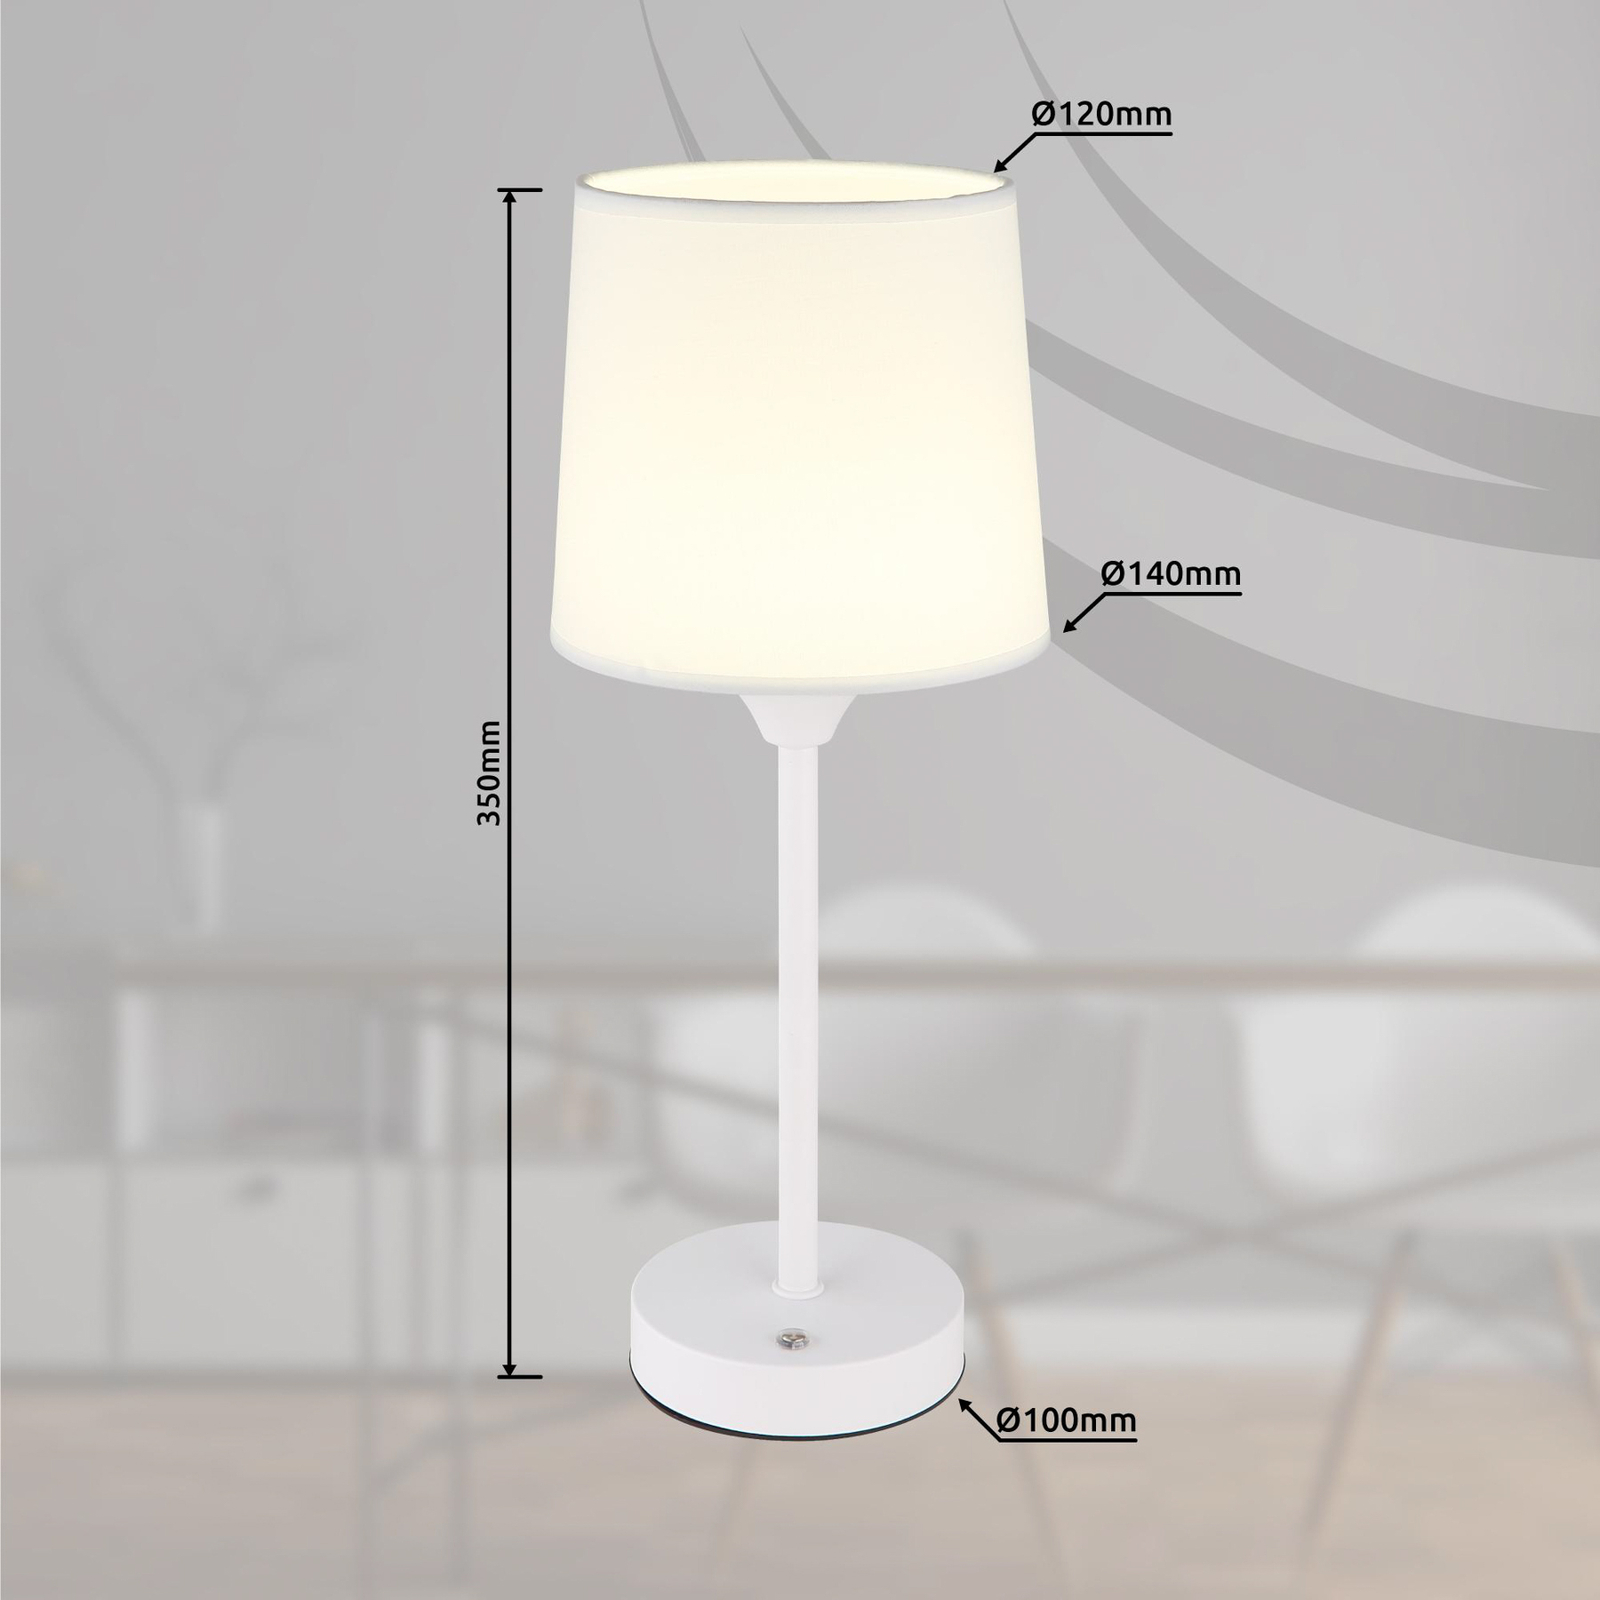 LED table lamp Lunki, white, height 35 cm, fabric, CCT